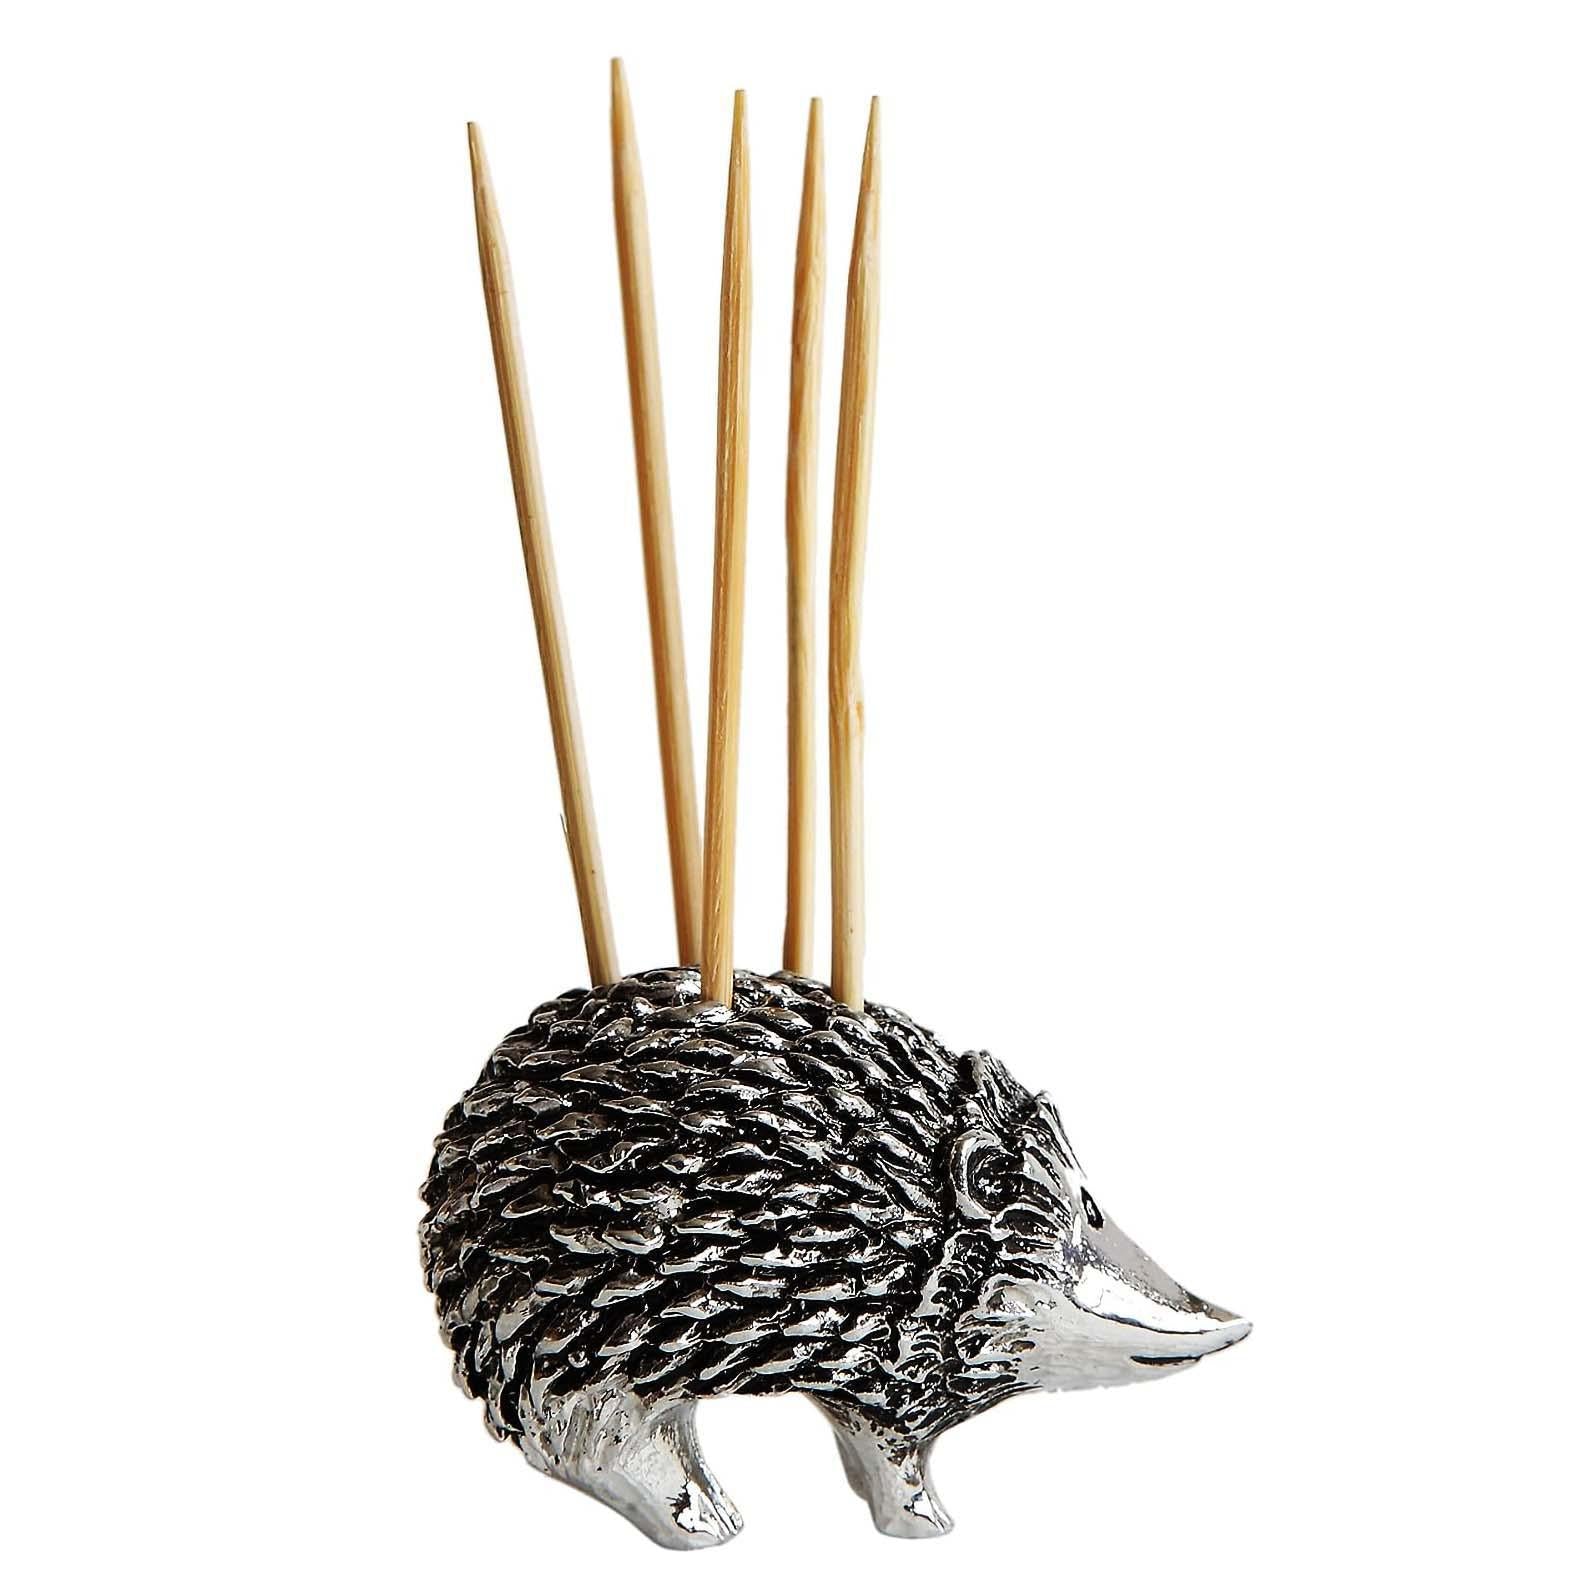 Pewter Hedgehog Toothpick Holder - Adorable and Functional